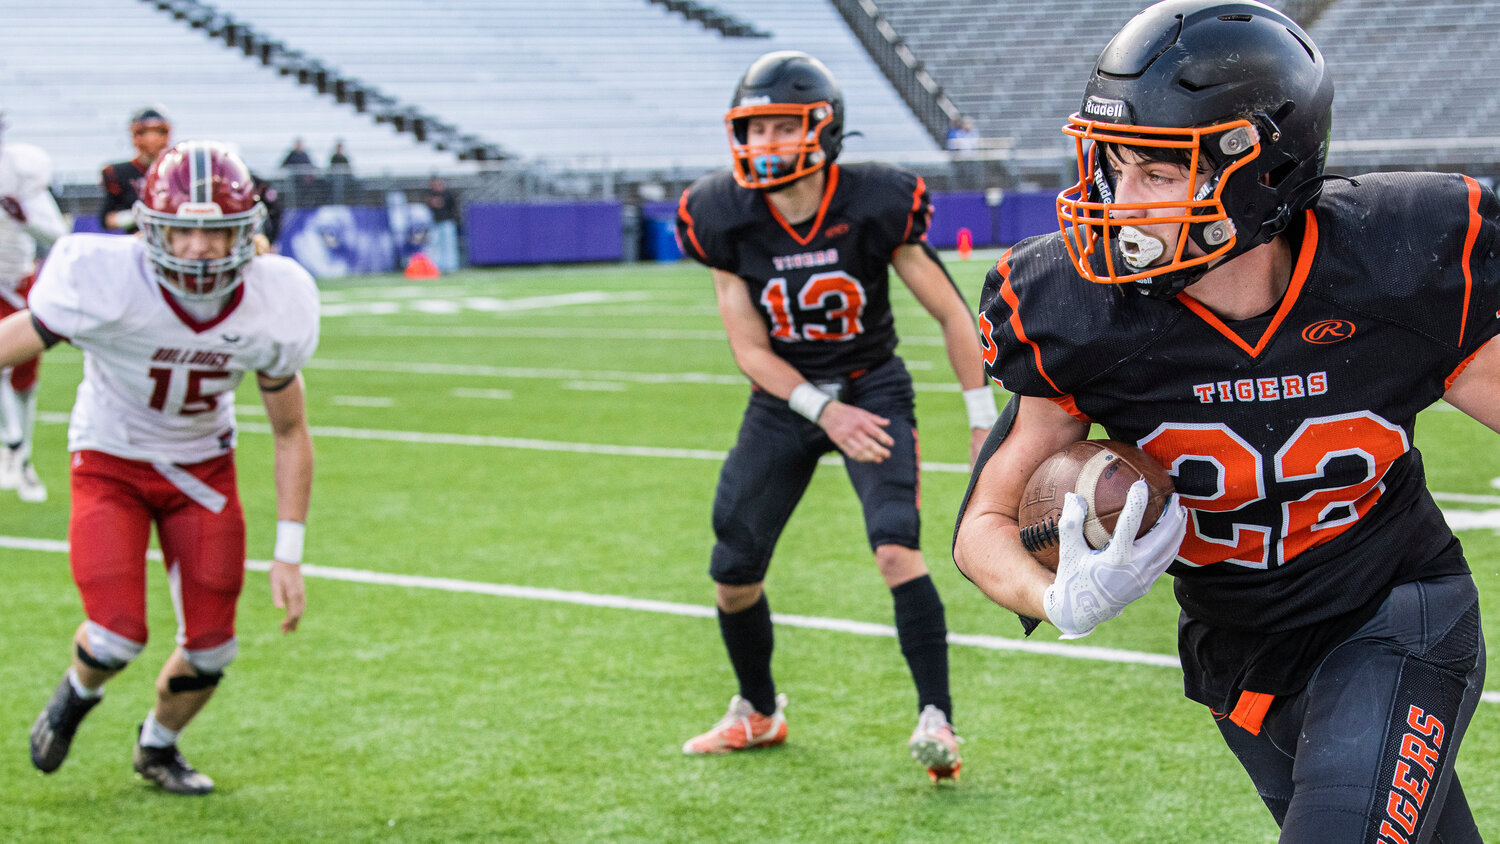 Napavine’s Cayle Kelly (22) runs the ball down the field during the 2B State Championship game against Okanogan at Husky Stadium on Saturday, Dec. 2.